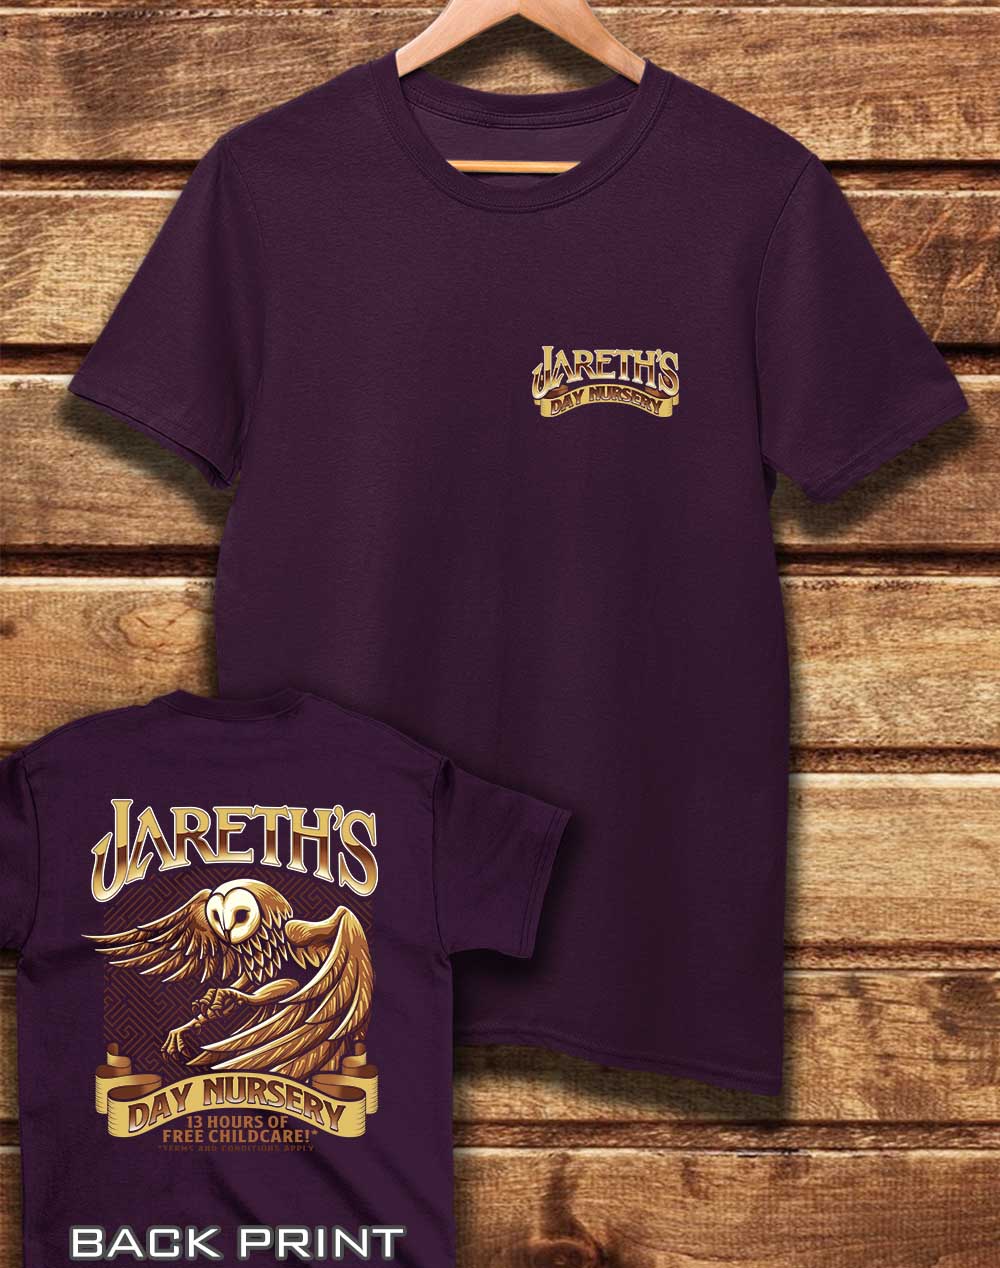 Eggplant - DELUXE Jareth's Day Nursery with Back Print Organic Cotton T-Shirt